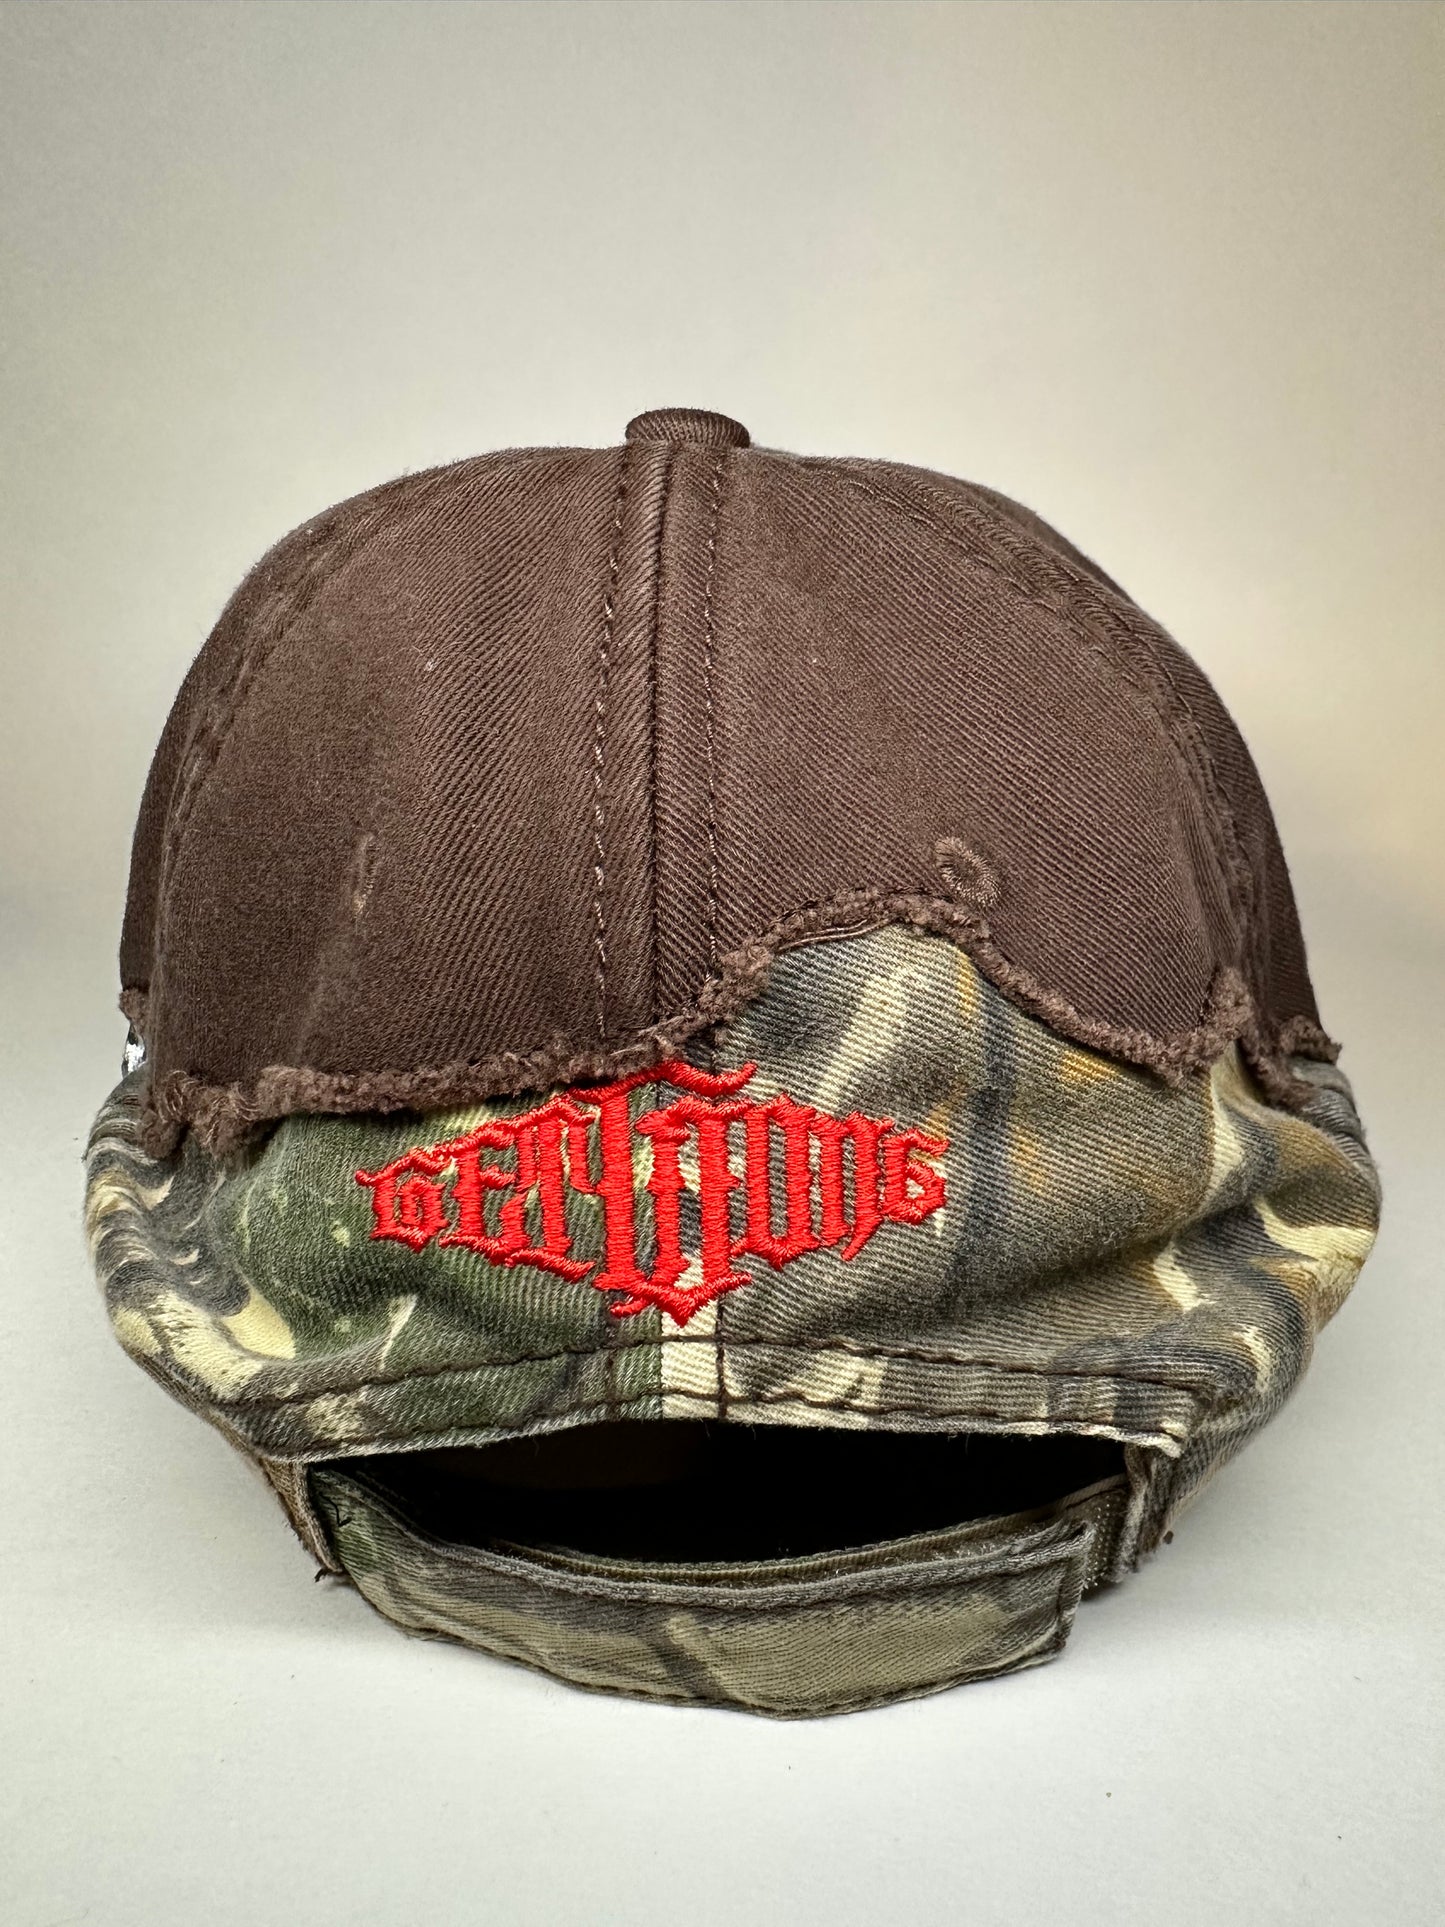 WE DON’T DIALL 911 HAT|RIPPED BROWN|